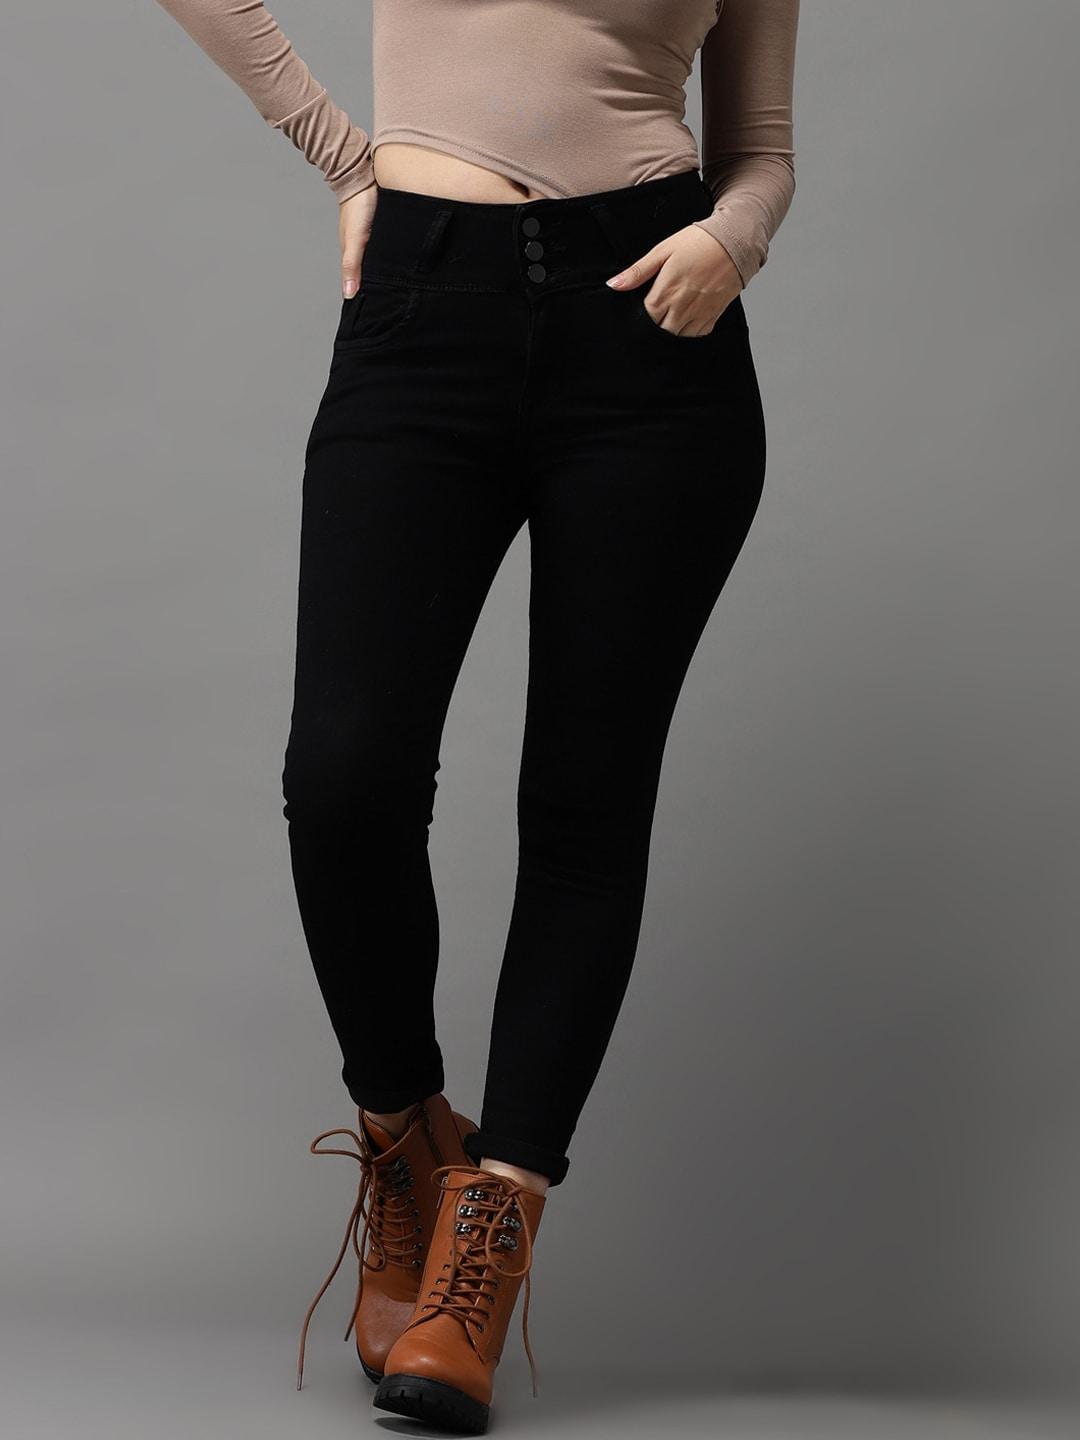 showoff-women-black-jean-skinny-fit-high-rise-stretchable-jeans